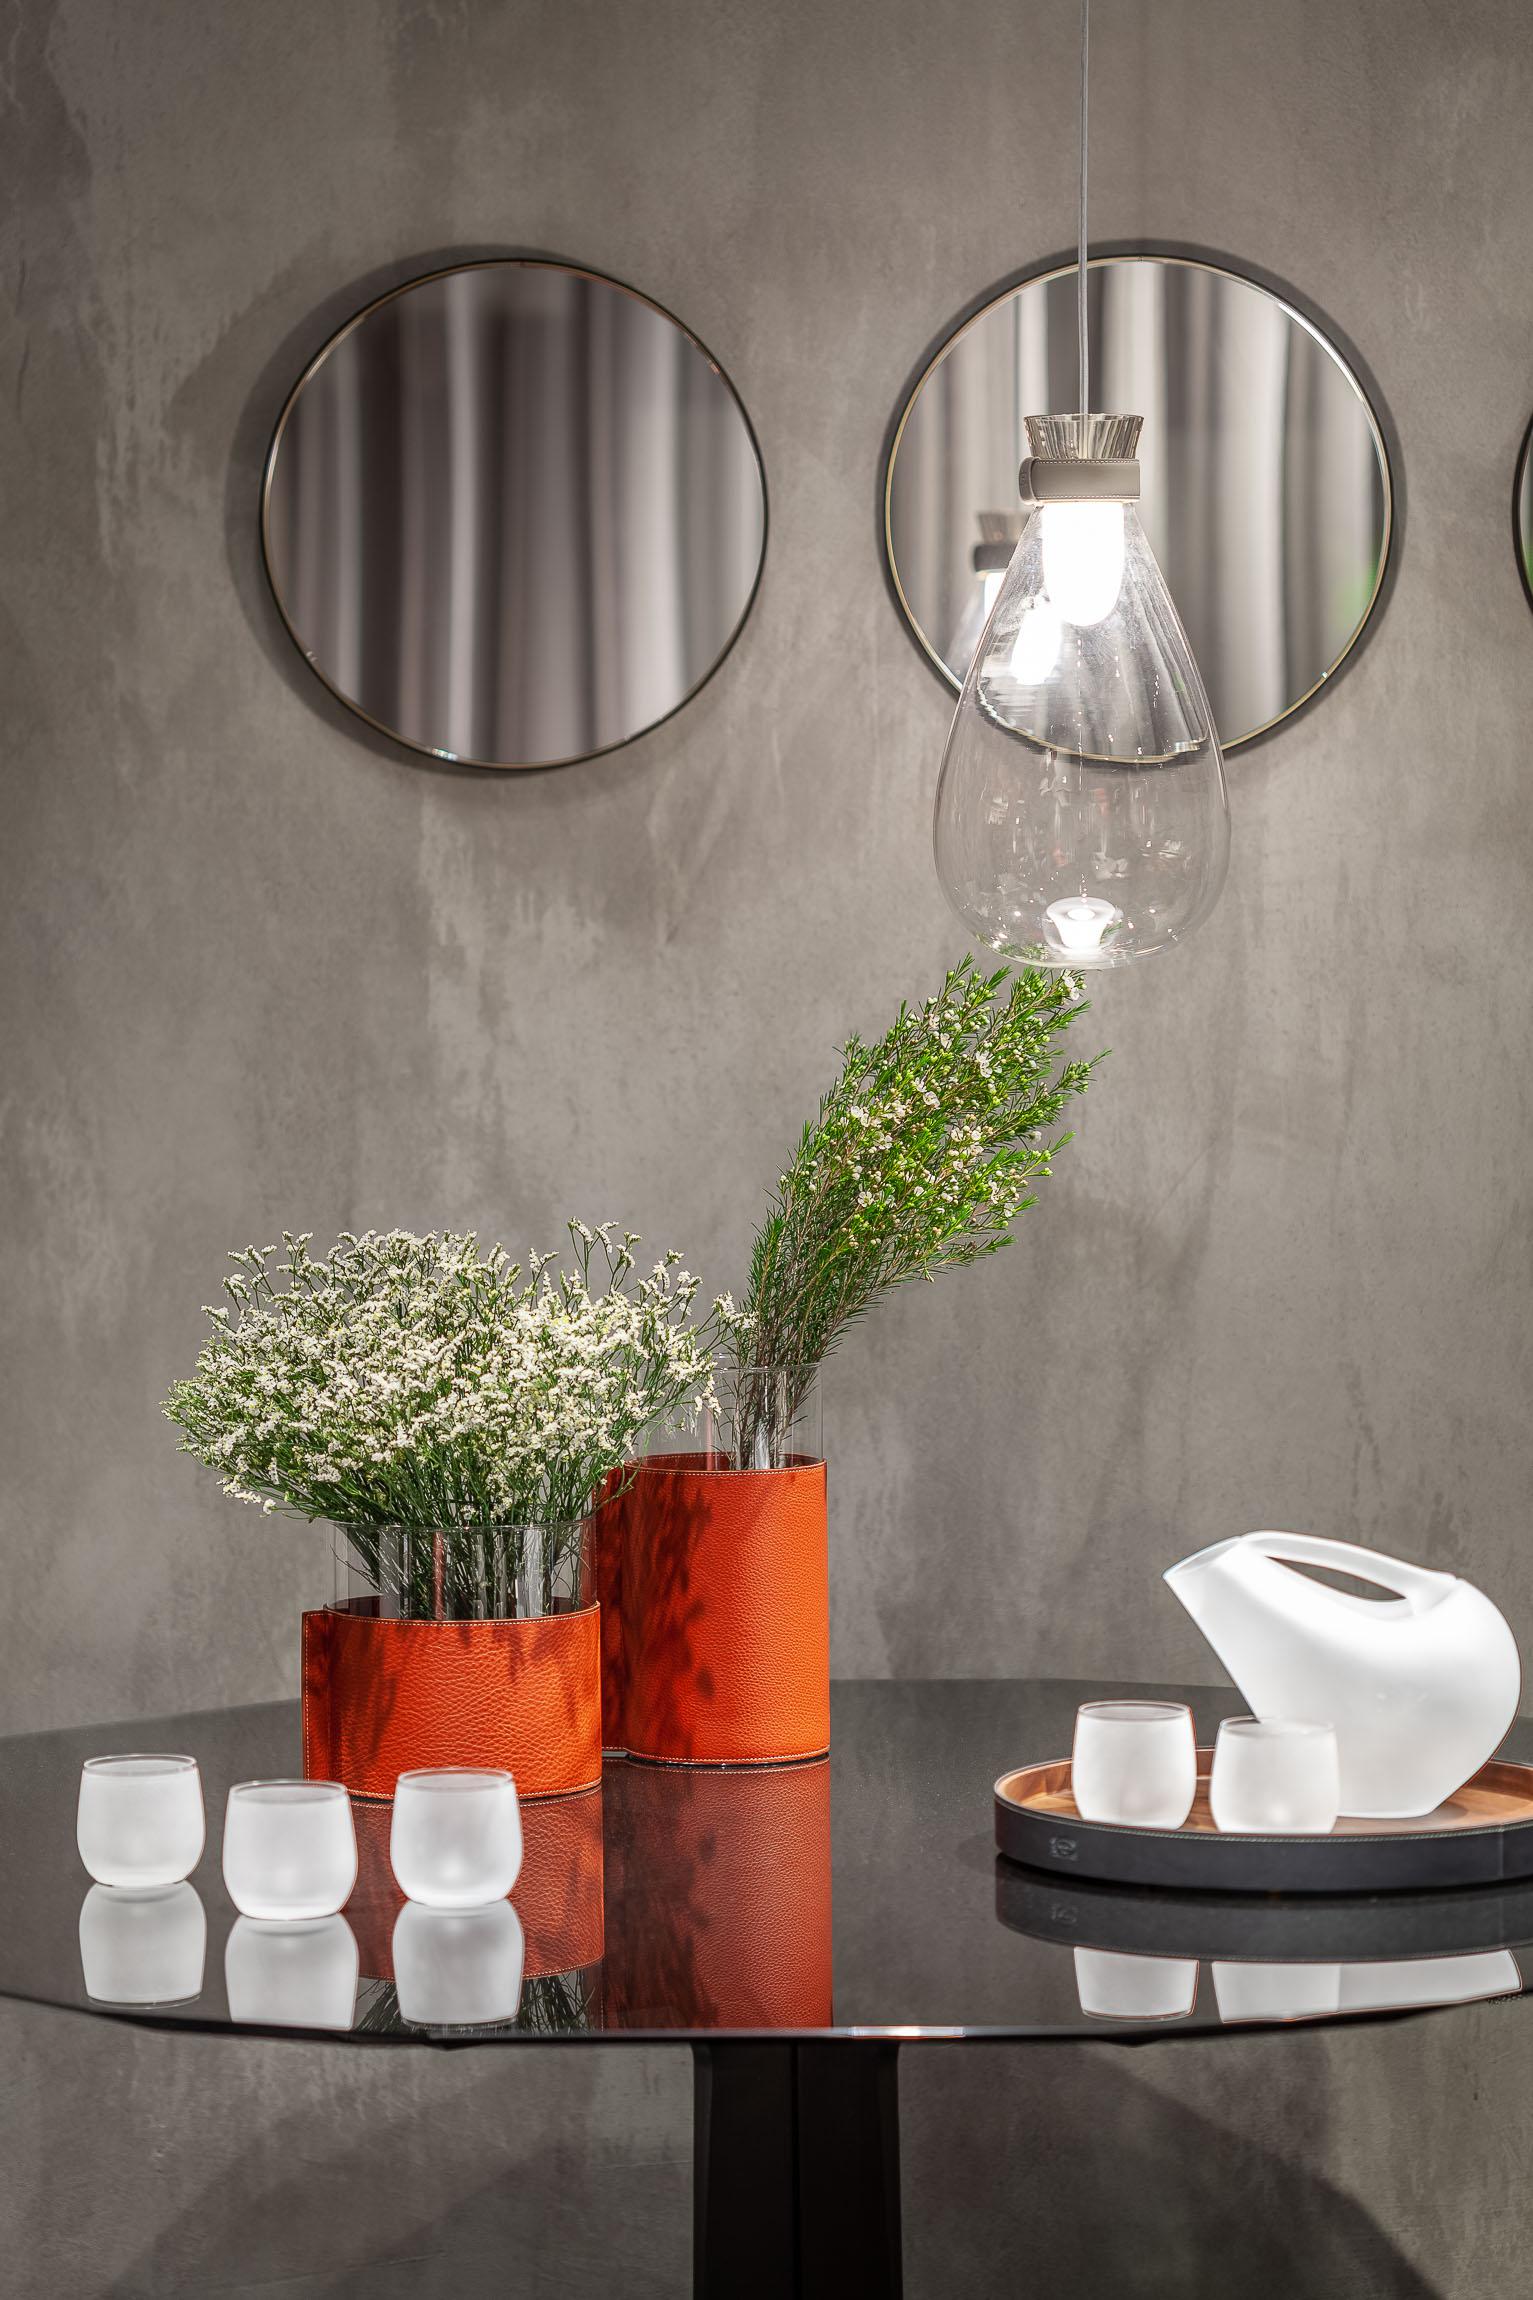 Leather pot is a transparent glass and soft leather for a family of open vases that can be mixed and matched or used on their own. The Leather Pot vases collection, designed by Poltrona Frau, consists of three simple transparent glass cylinders in